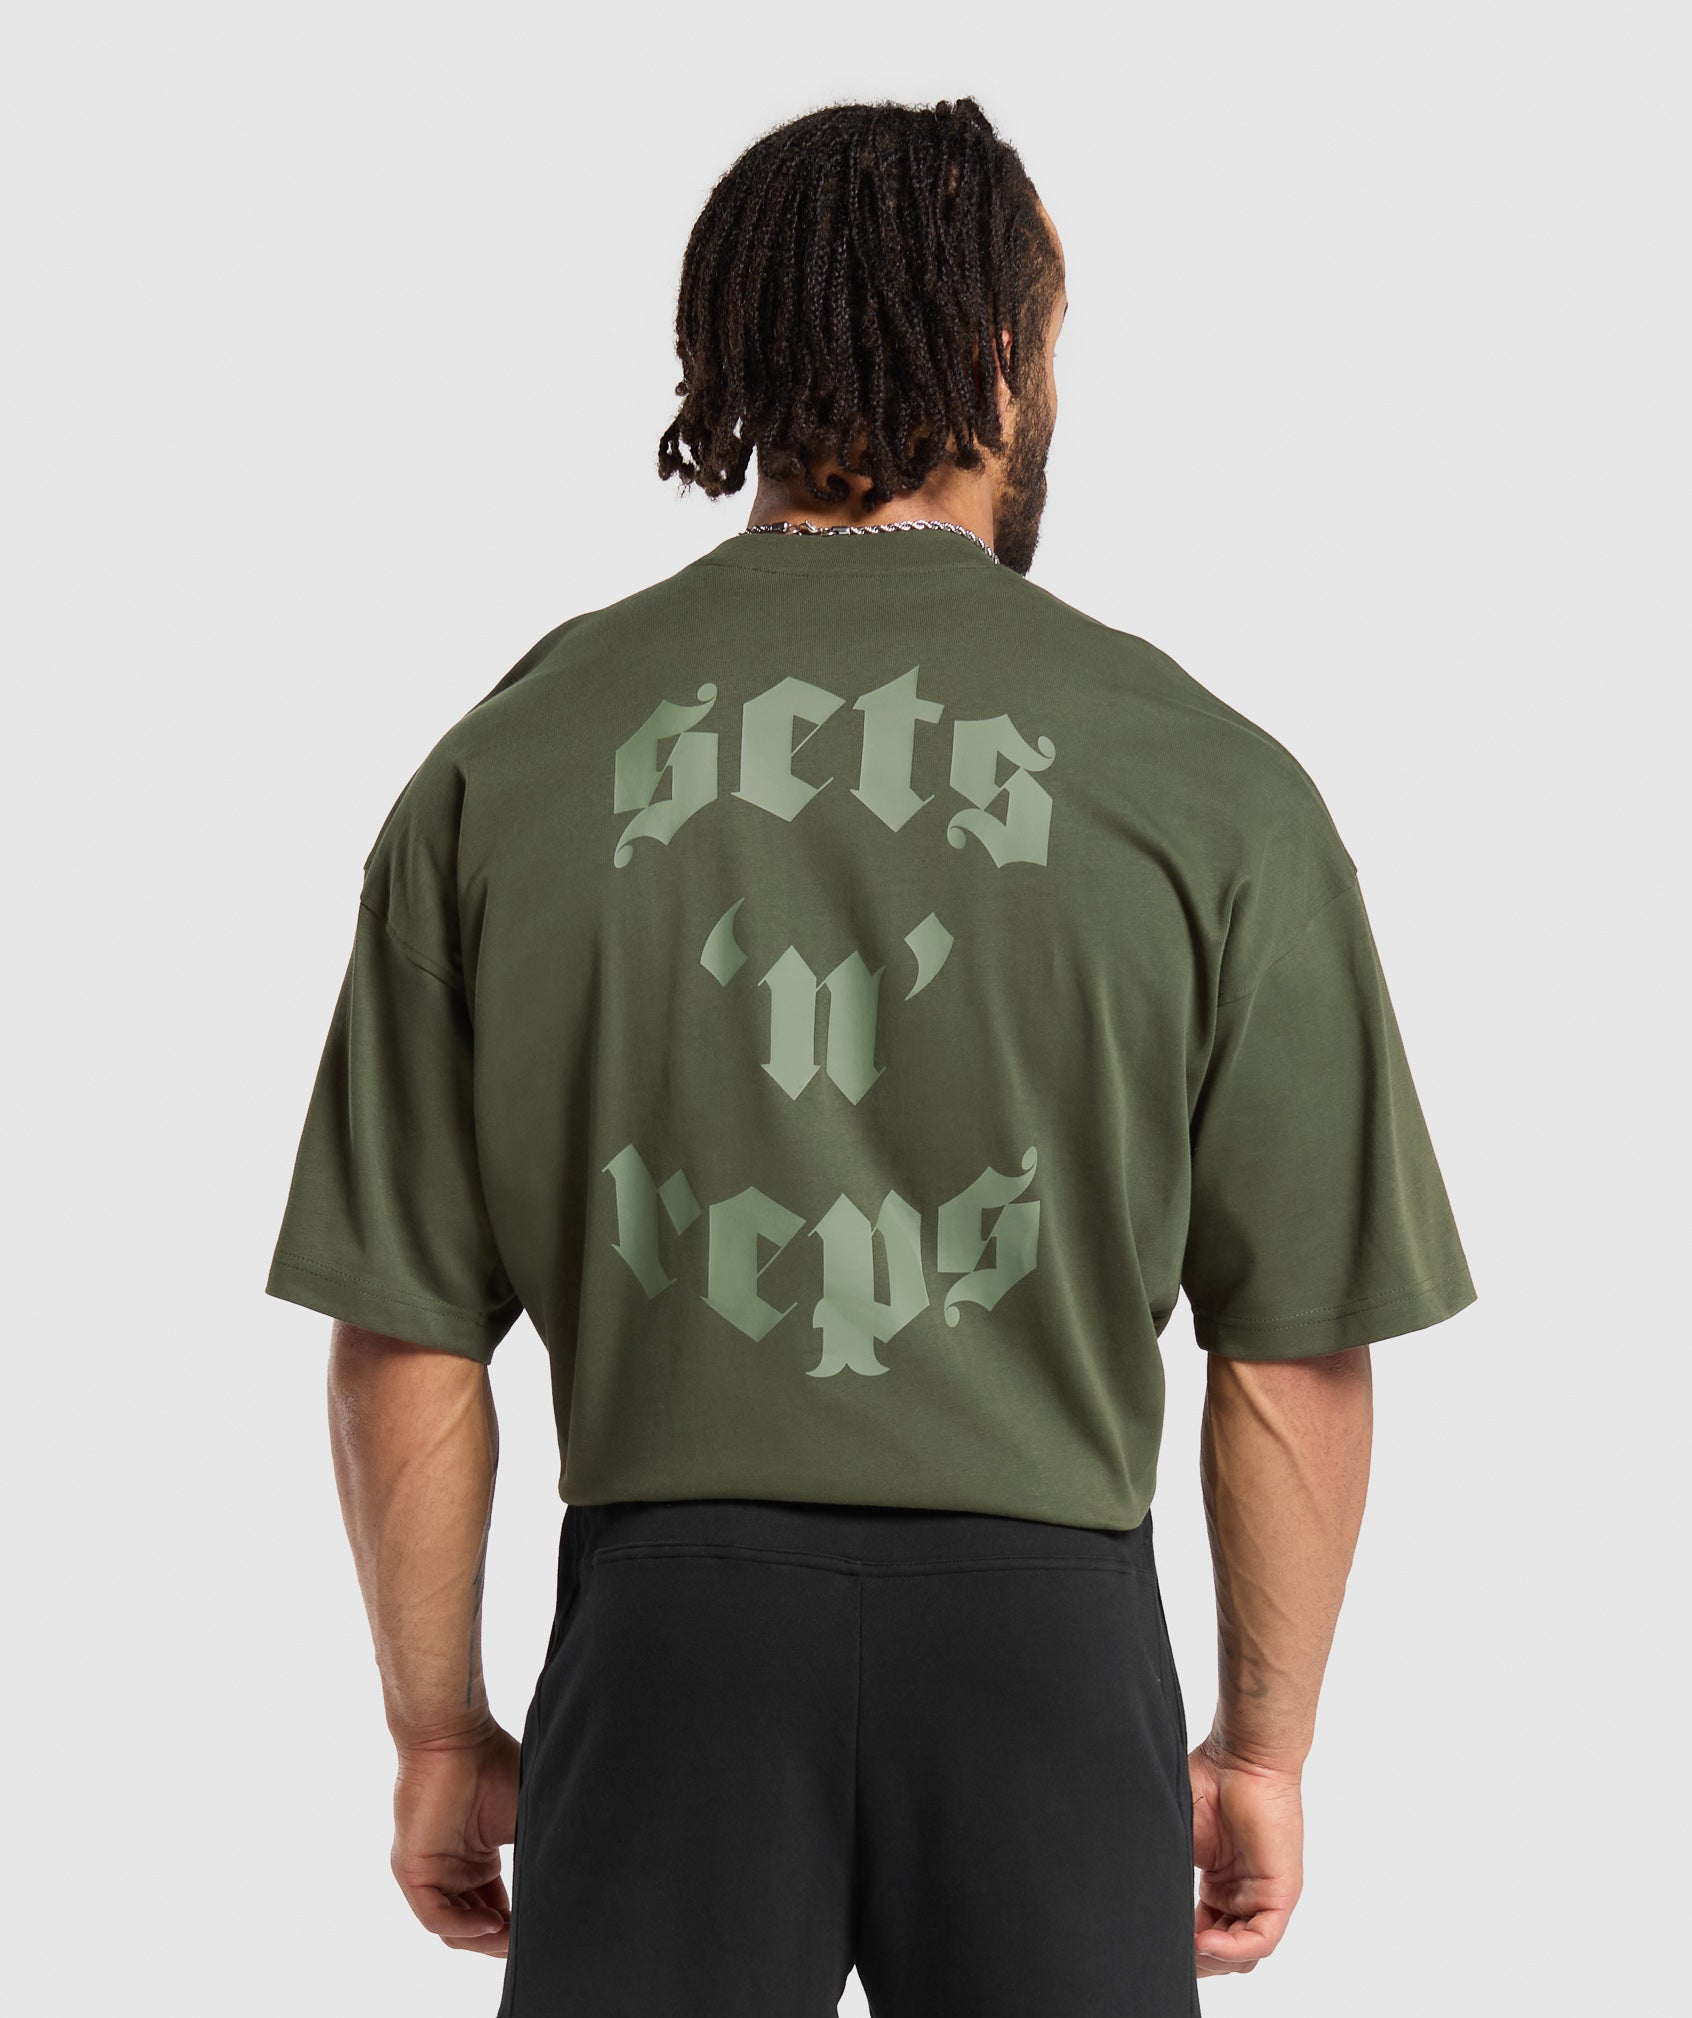 Sets N Reps T-Shirt in Winter Olive